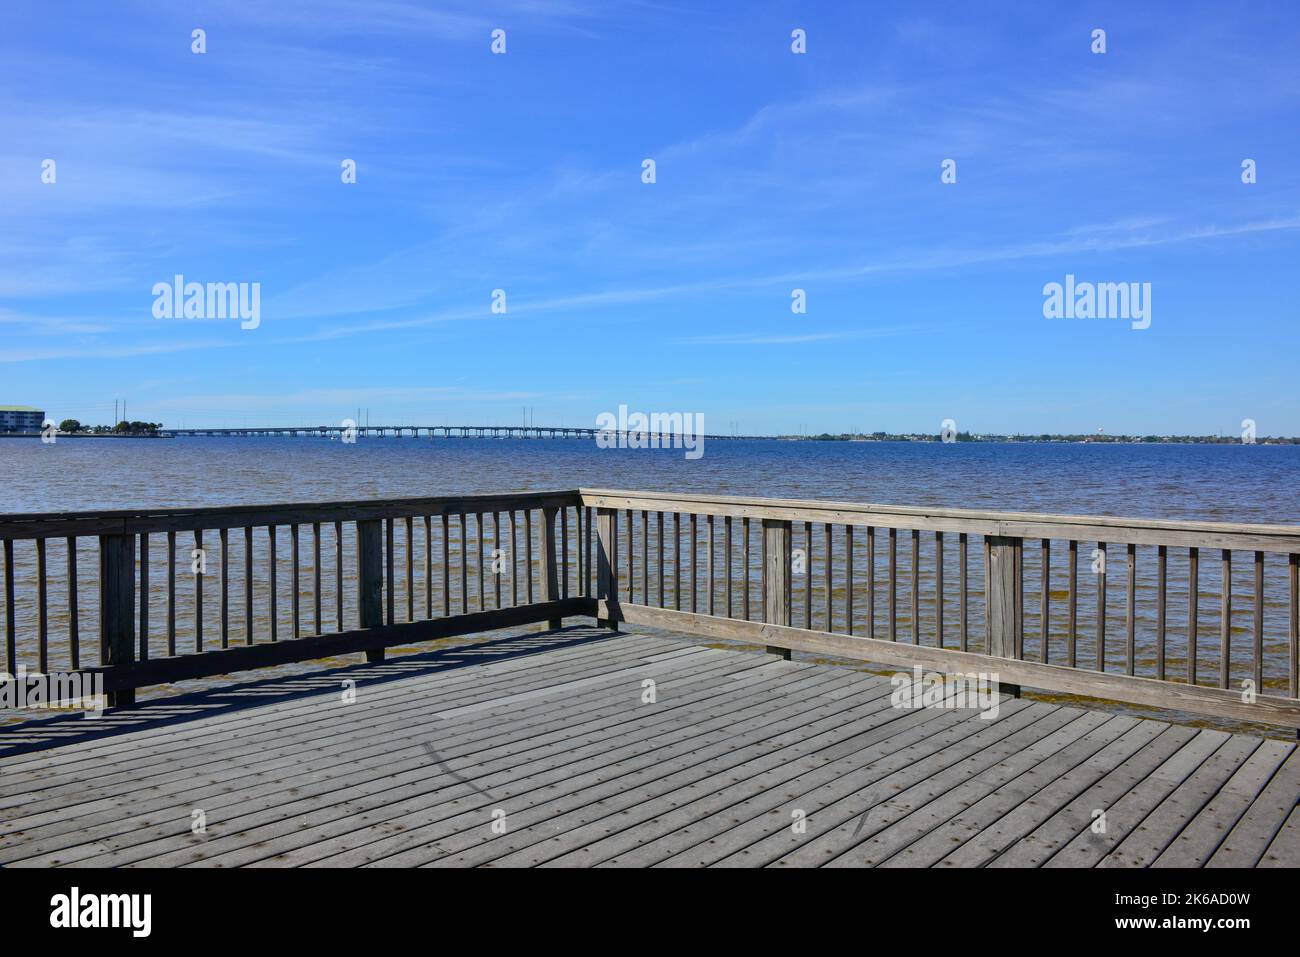 Distant View of the Gilchrist Bridge crossing the Peace River between Port Charlotte and Punta Gorda, Florida from a recreational path with observatio Stock Photo